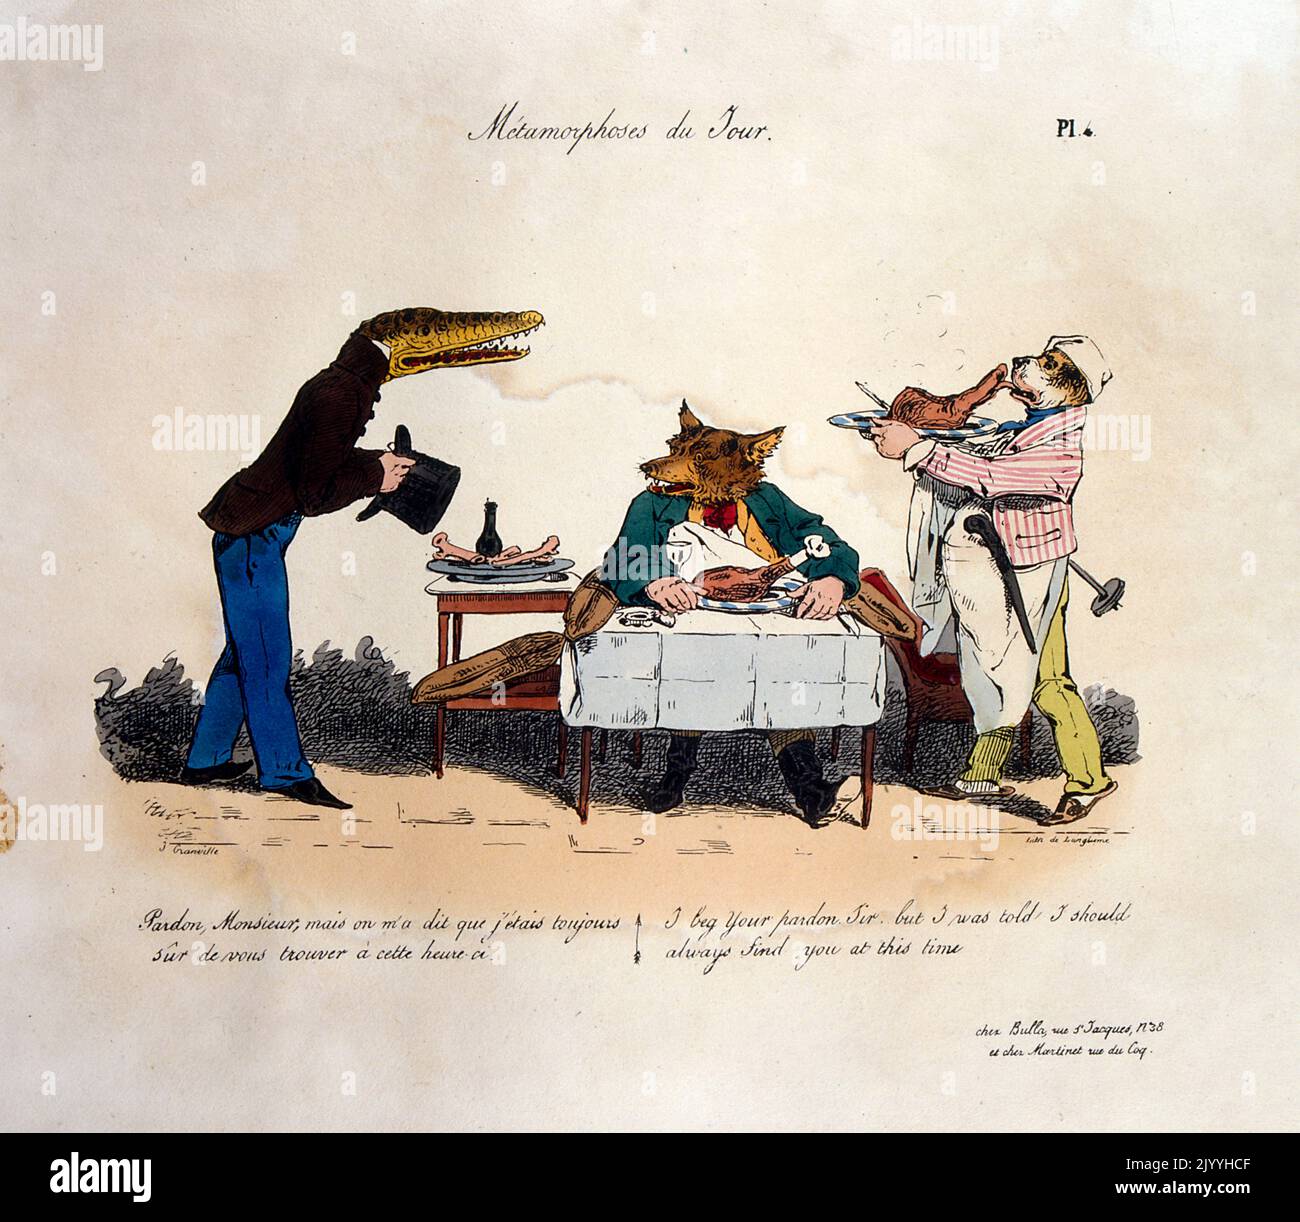 Coloured satirical Illustration of a fox eating at a table on his own being served by a dog. A crocodile man approaches saying, 'I beg your pardon, sir, but I was told I would always find you at this time', by Pierre Langlume (1790-1830), French artist. Stock Photo